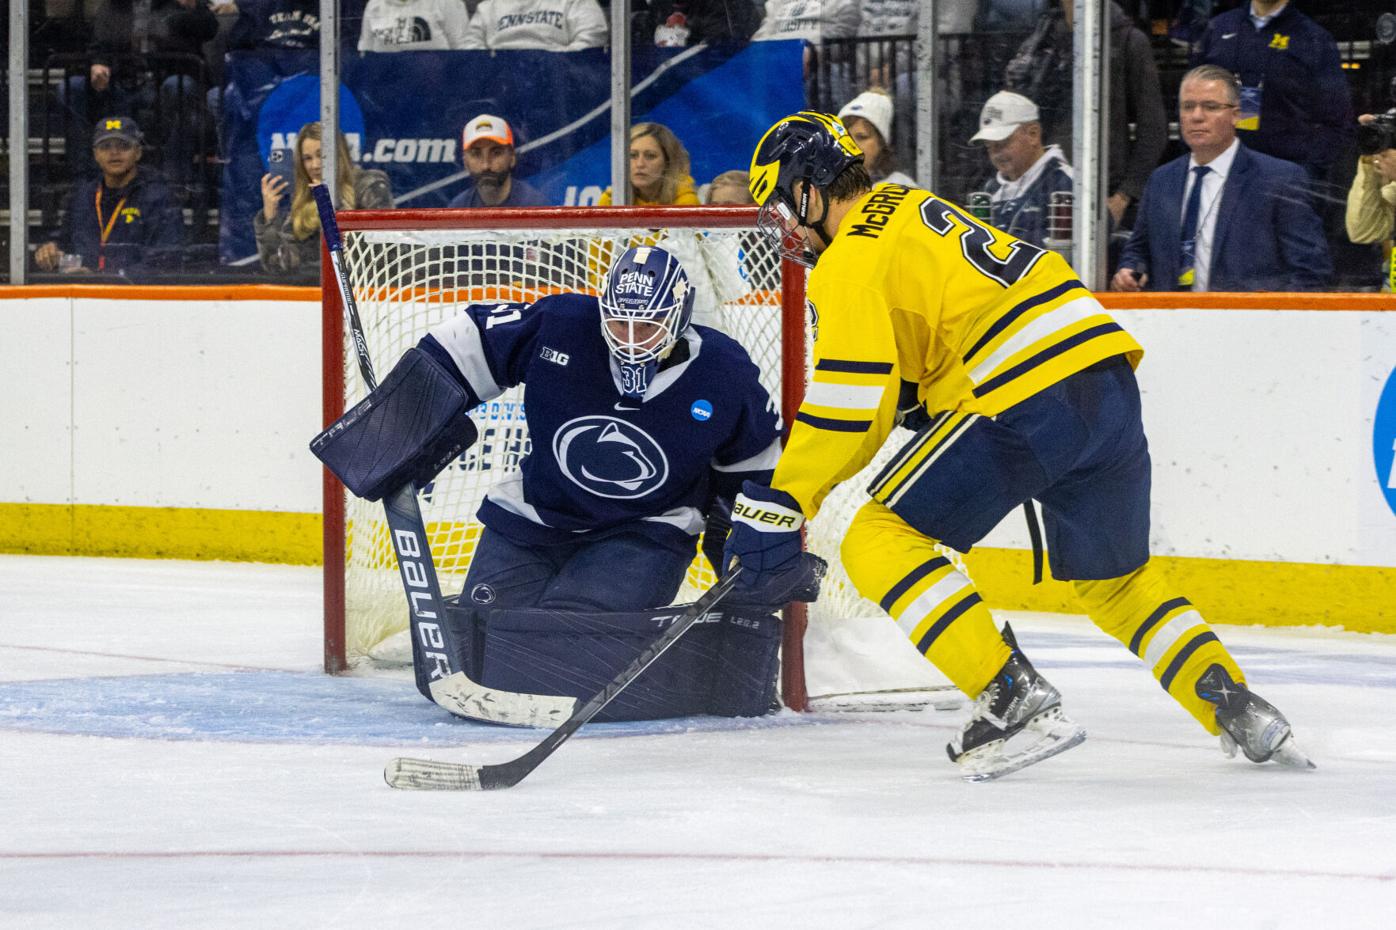 Penn State men's hockey has array of new and returning talent